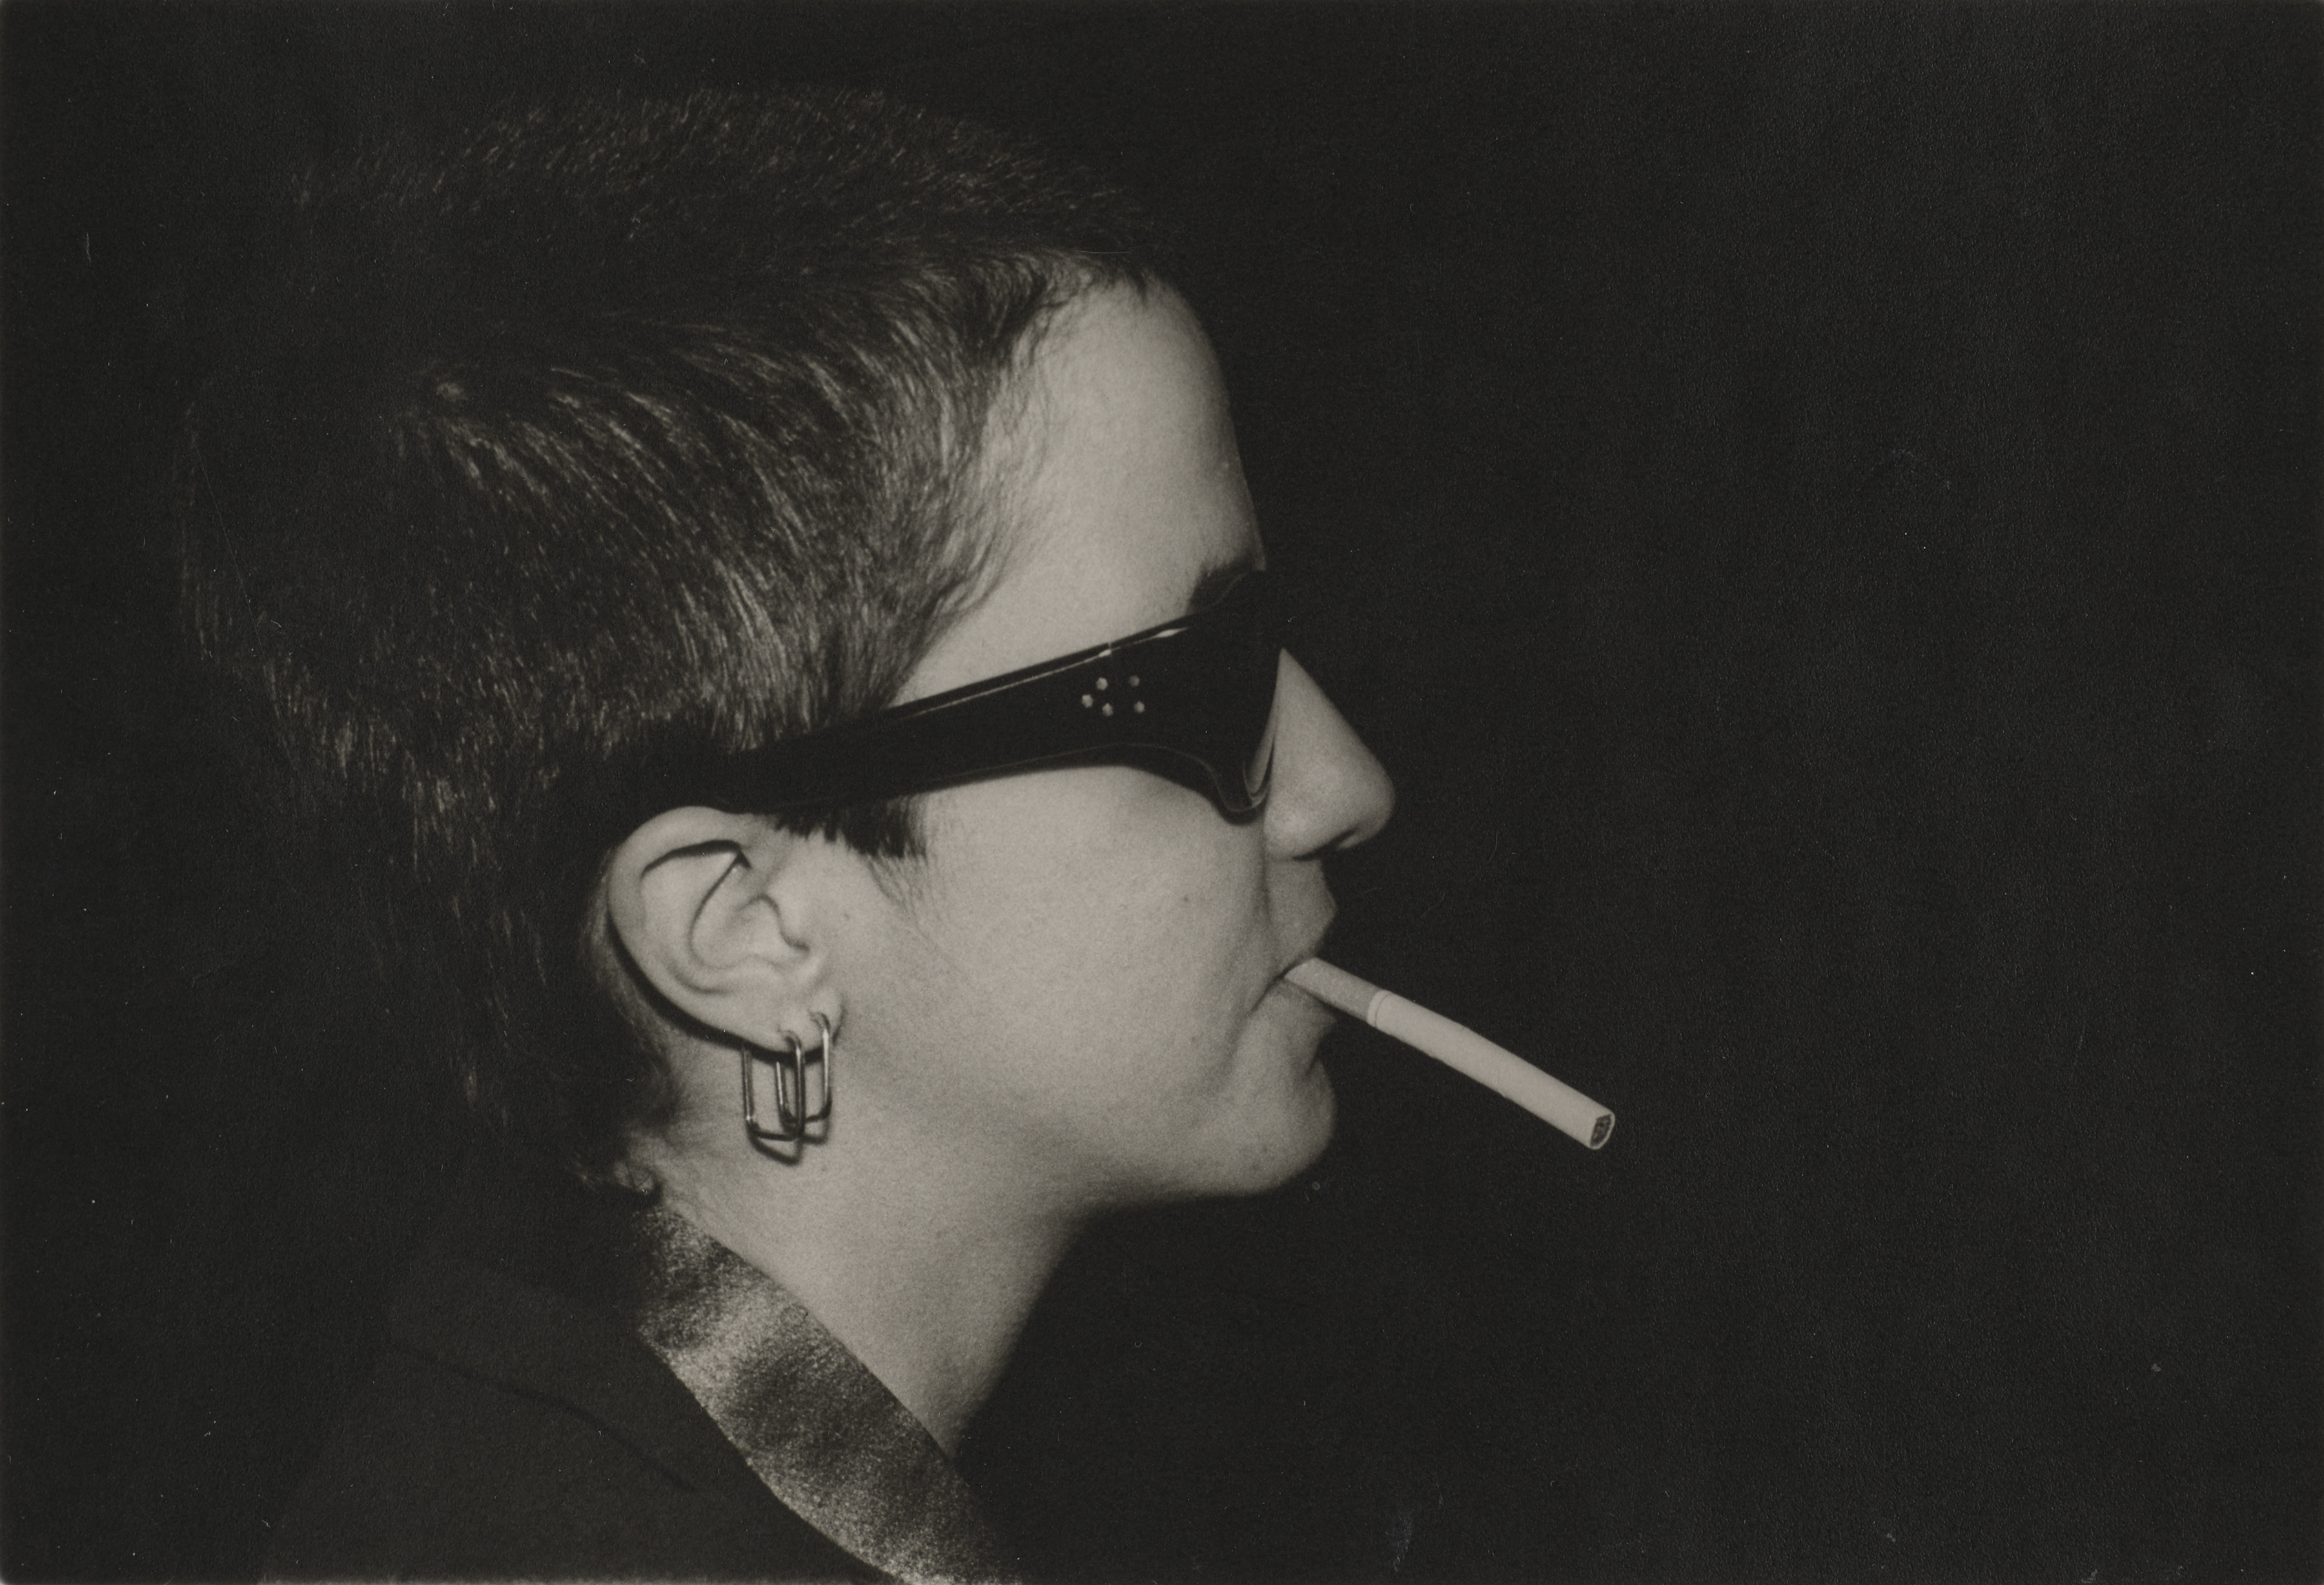 Photograph of Kathy Acker smoking and wearing sunglasses photographed by Marcia Resnick